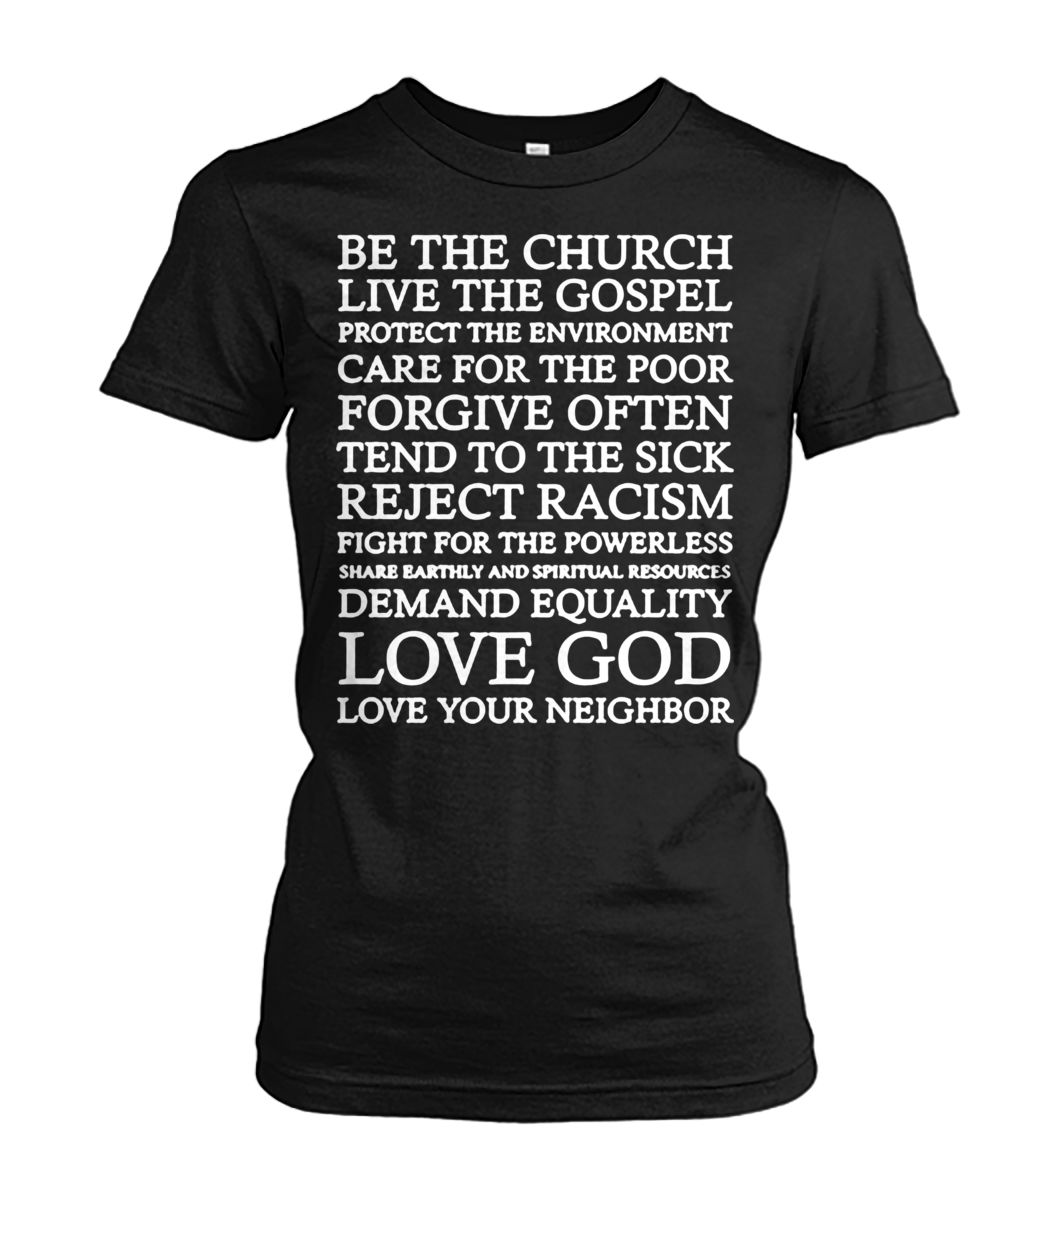 Be the church live the gospel protect the enviroment women's crew tee